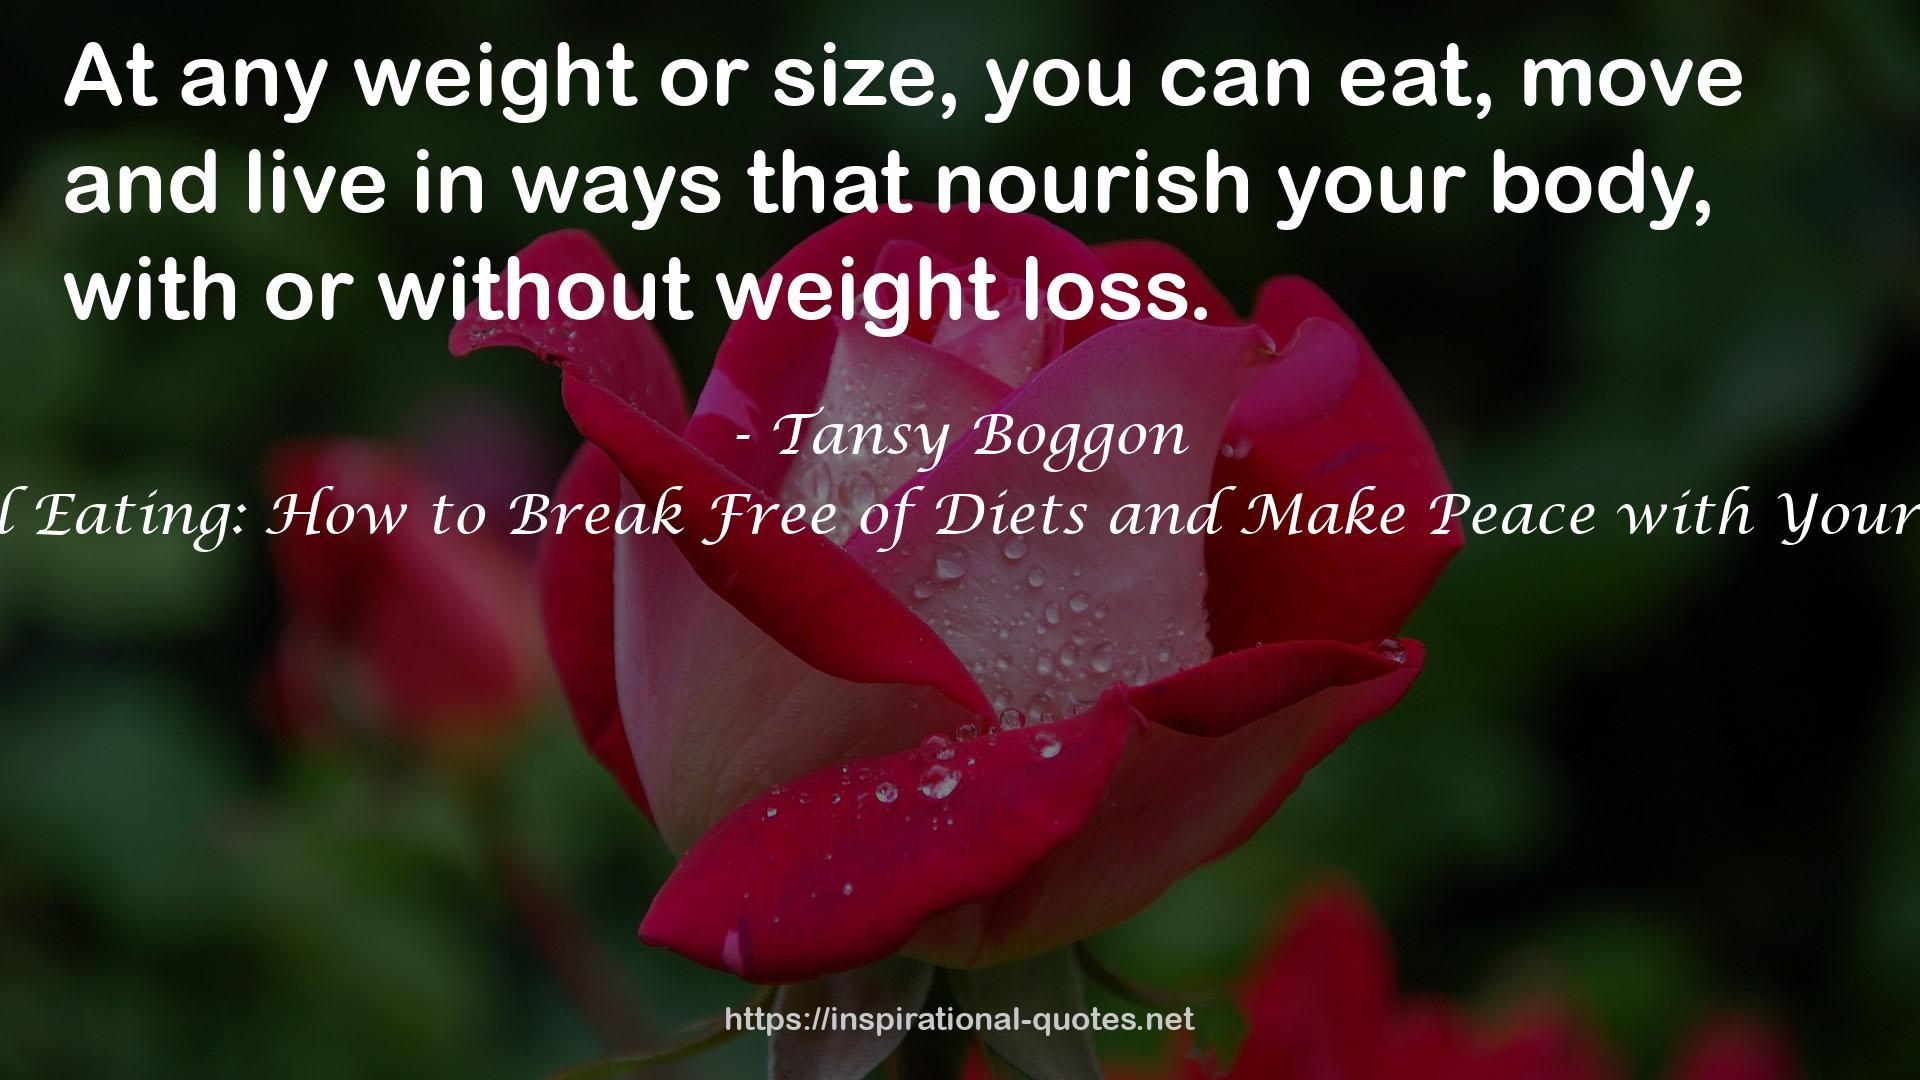 Joyful Eating: How to Break Free of Diets and Make Peace with Your Body QUOTES